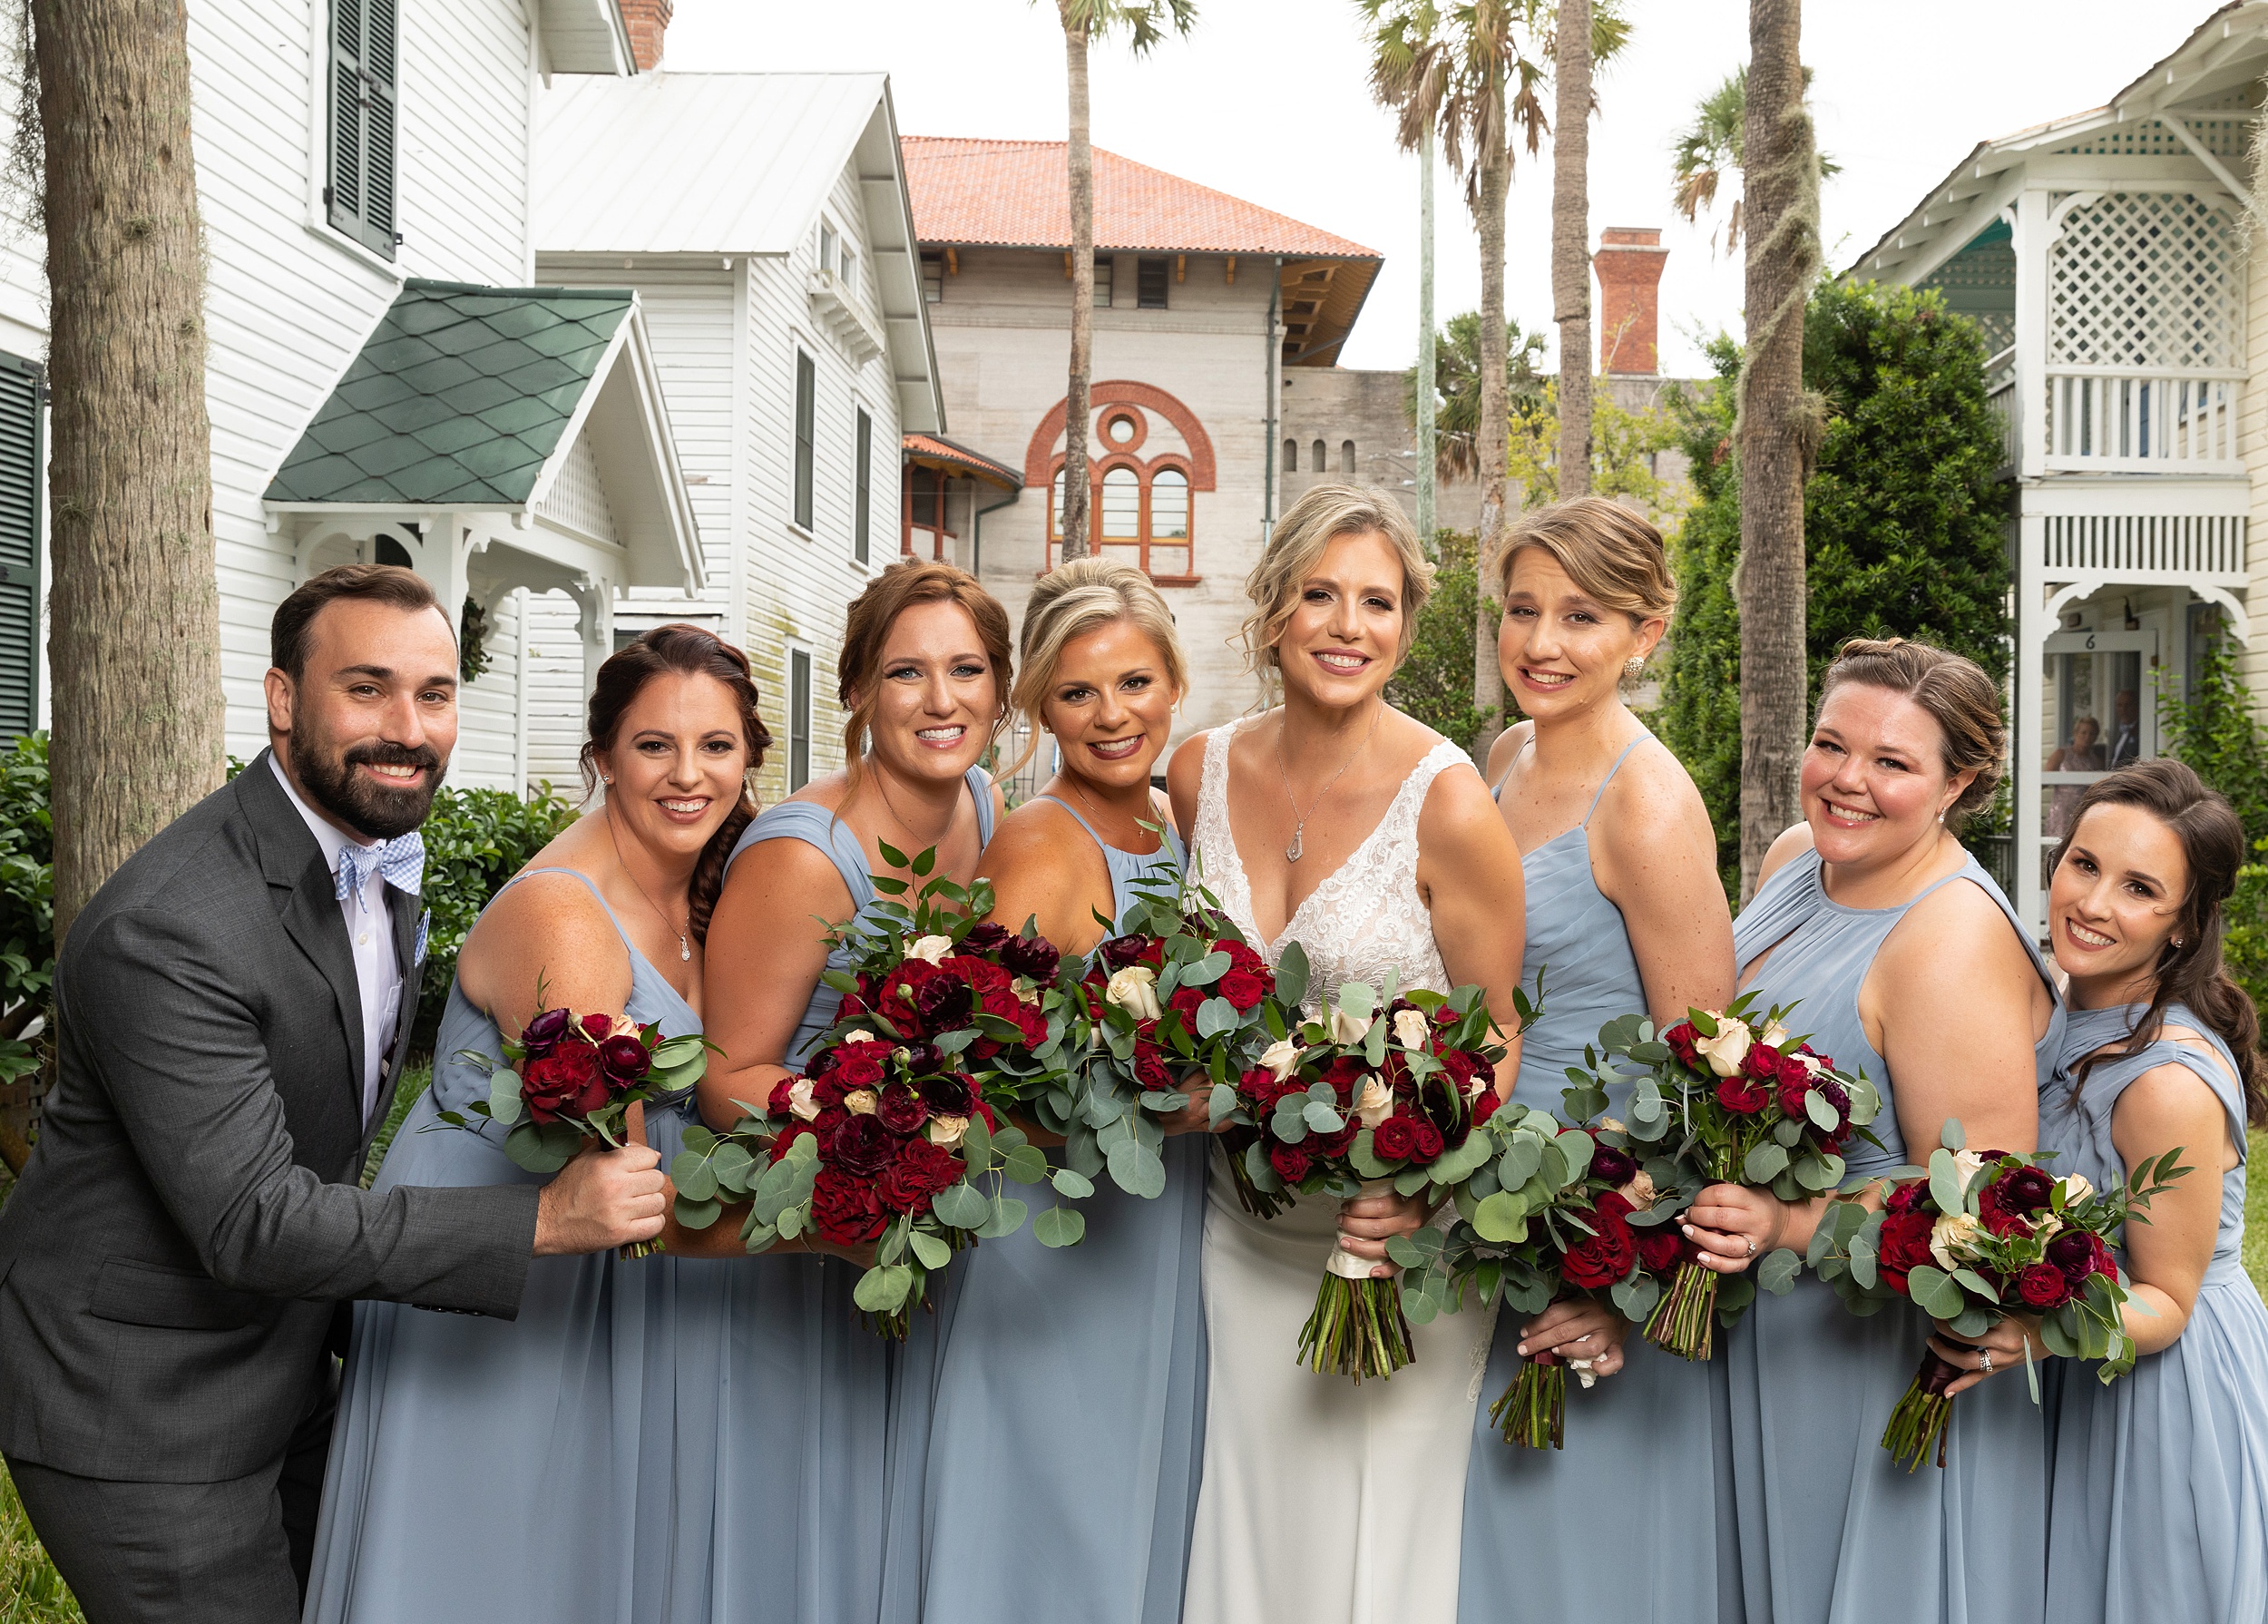 A bride stands outside holding her bouquet with her bridesmaids in blue dresses